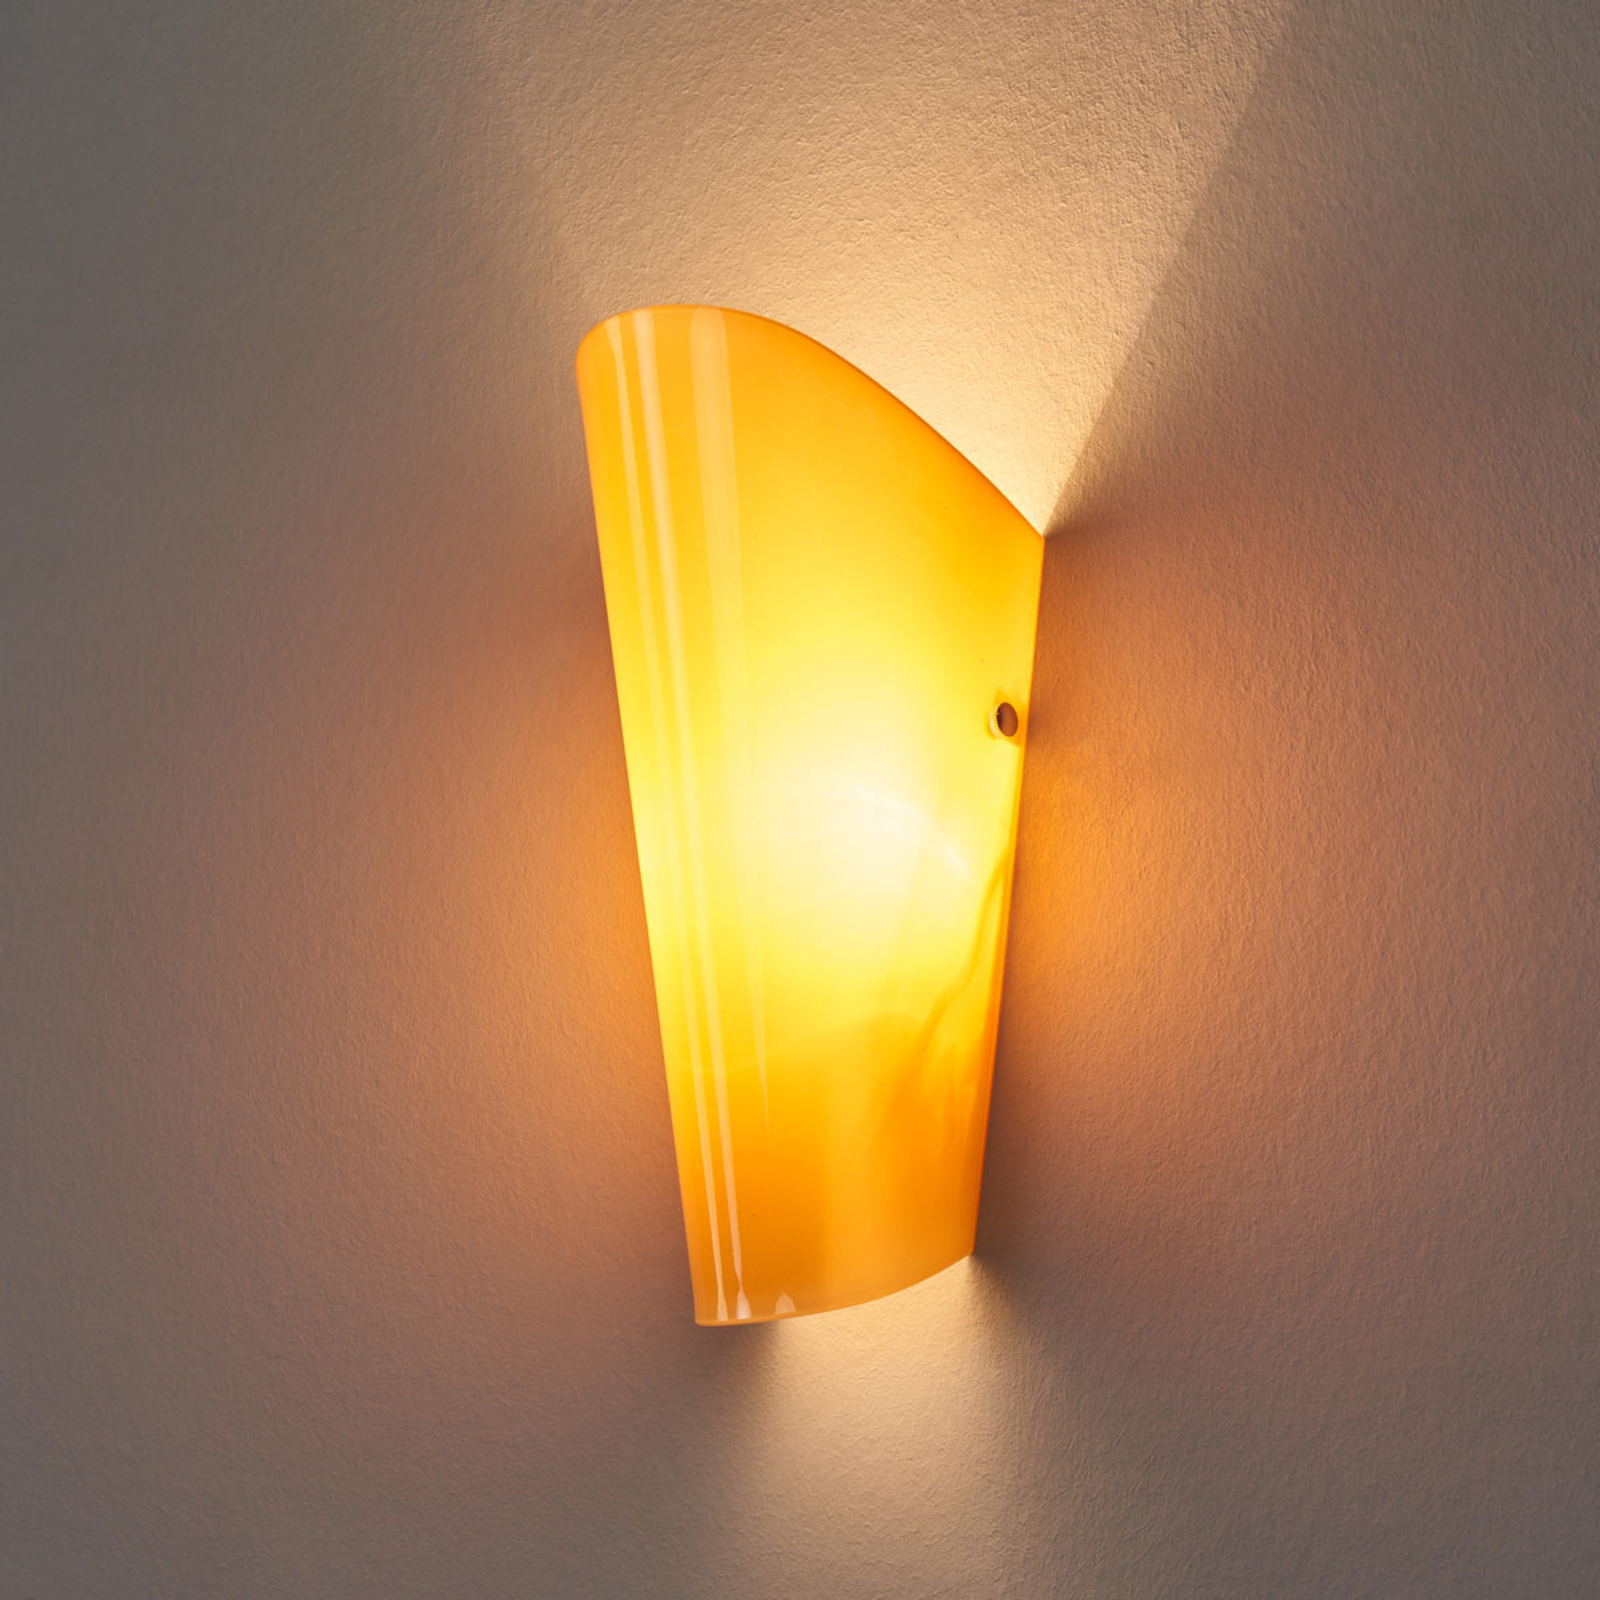 Bloom wall light made of glass, amber